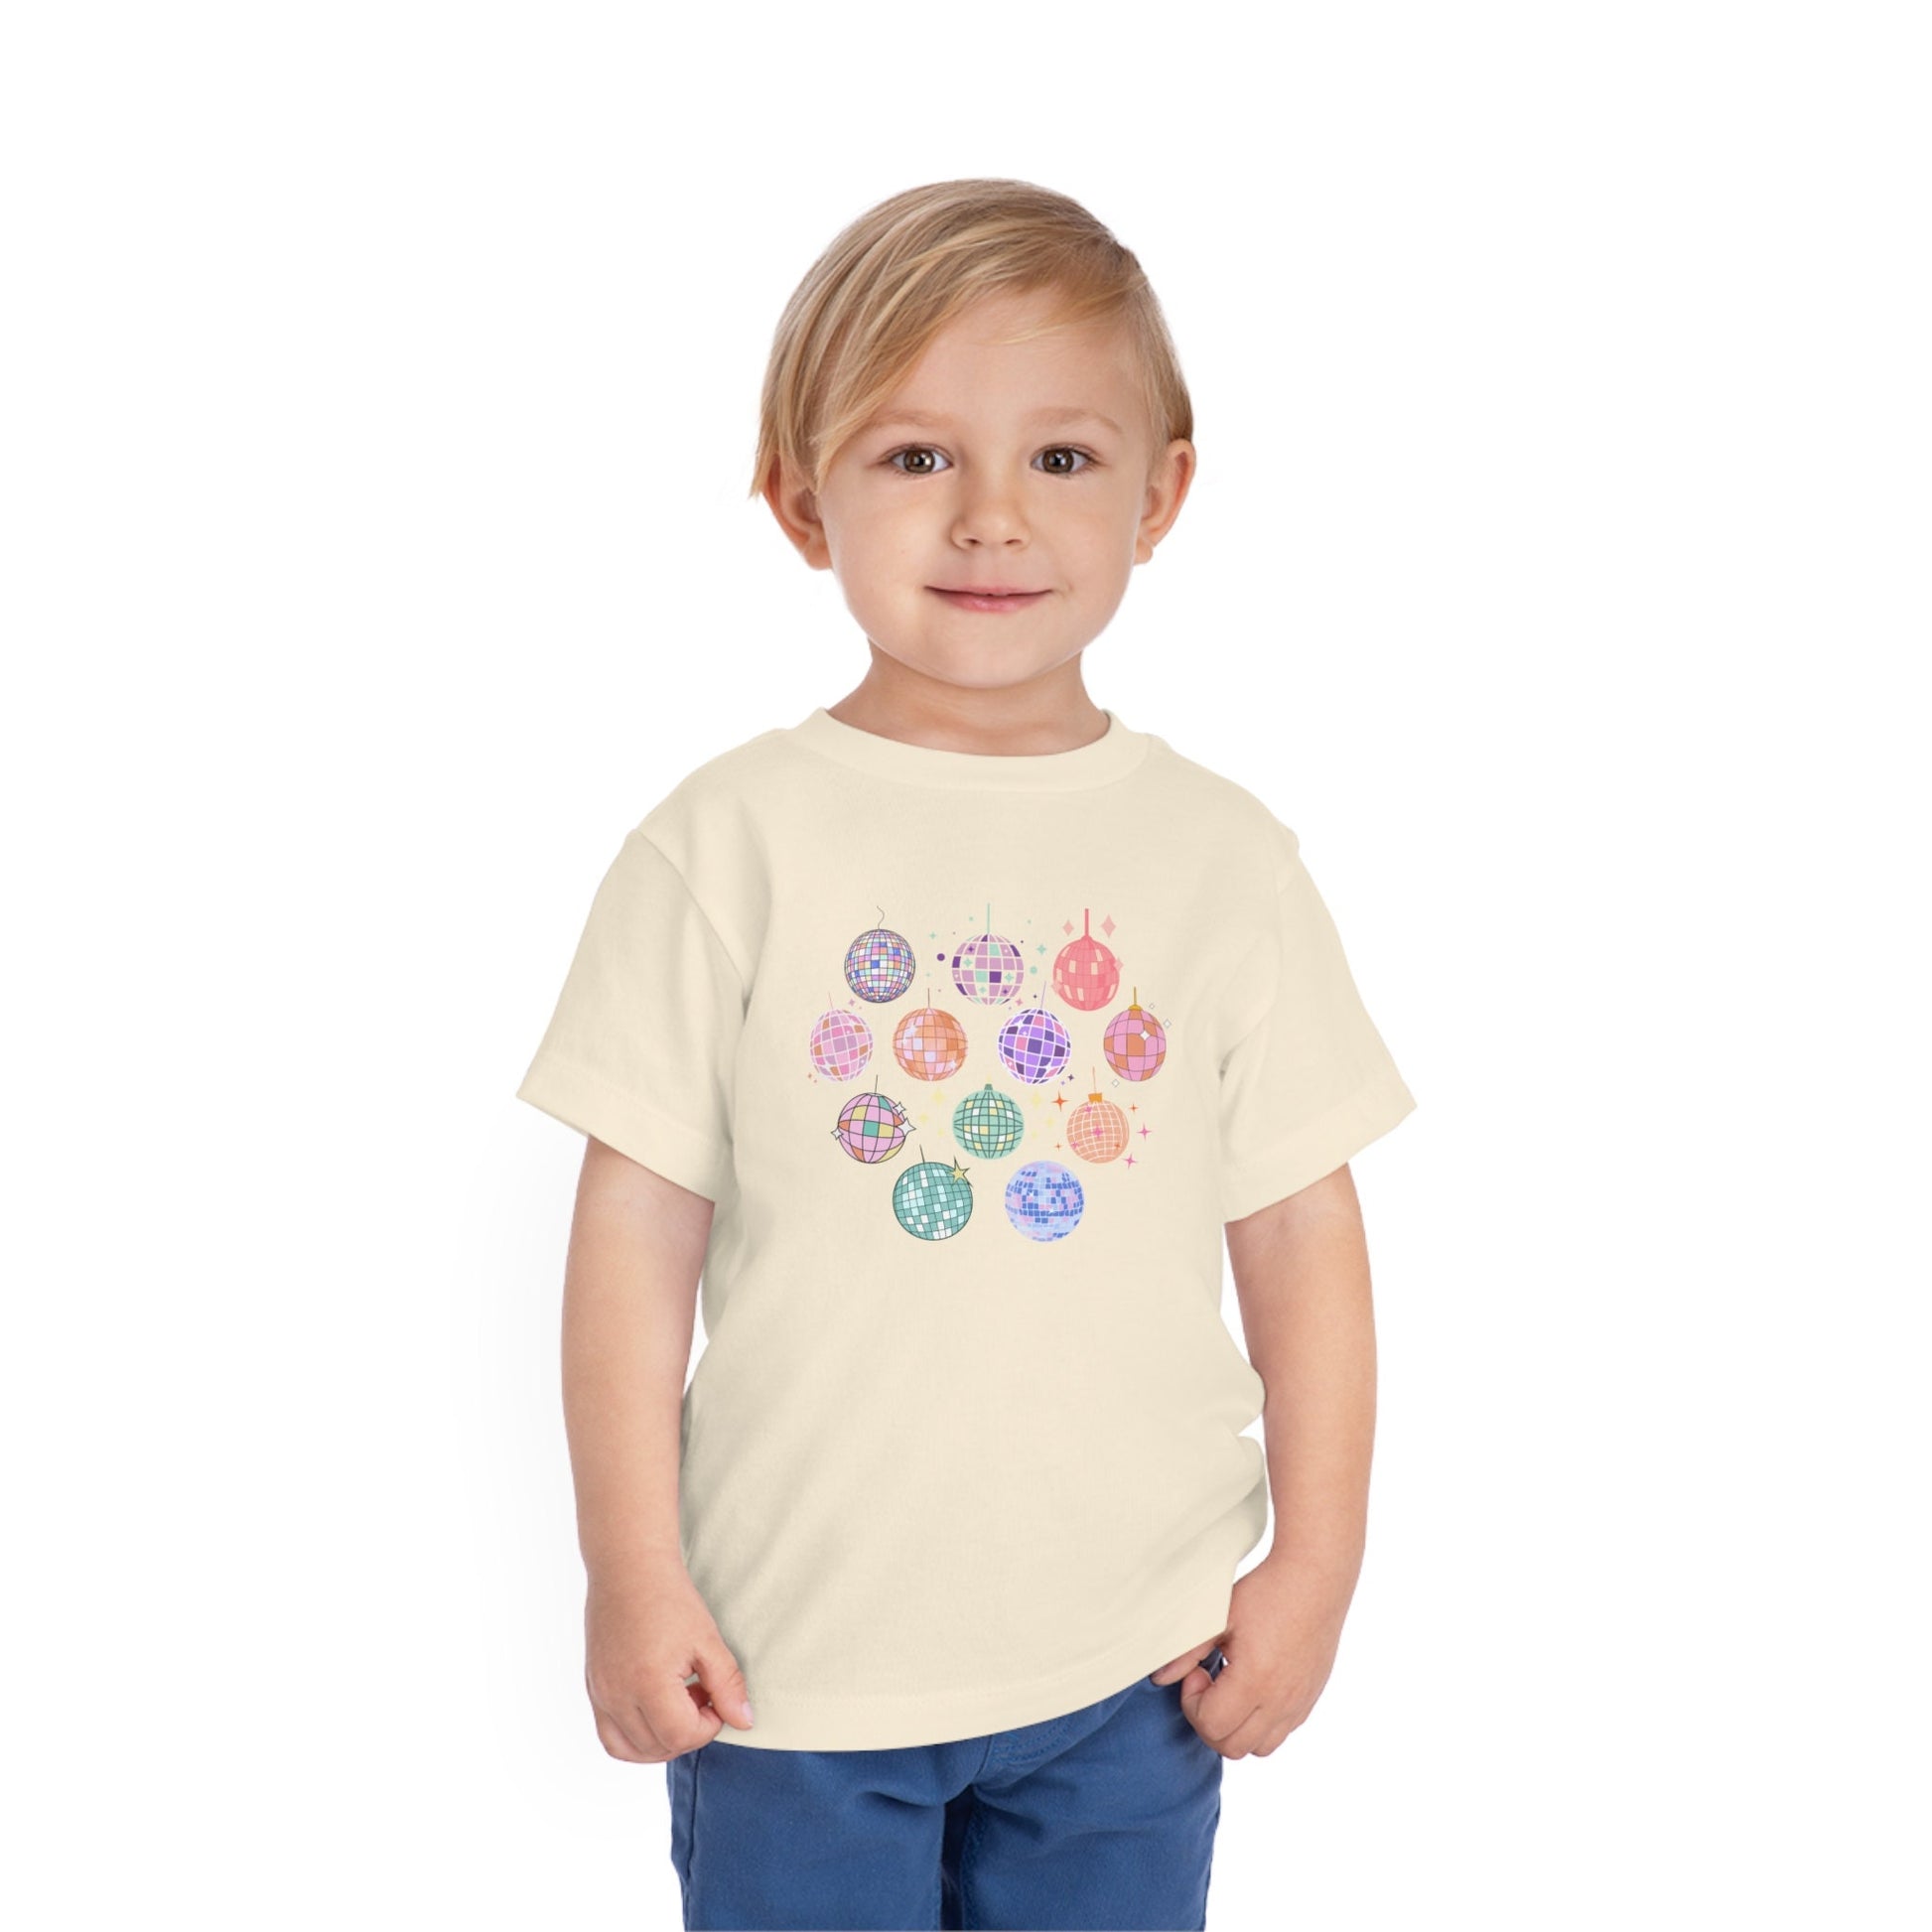 Toddler Disco Ball Shirt, Retro Party Tee, Rainbow Shirts, Subtle Pride Outfit, Mirrorball Sweatshirt, Cute Womens Tops for Summer